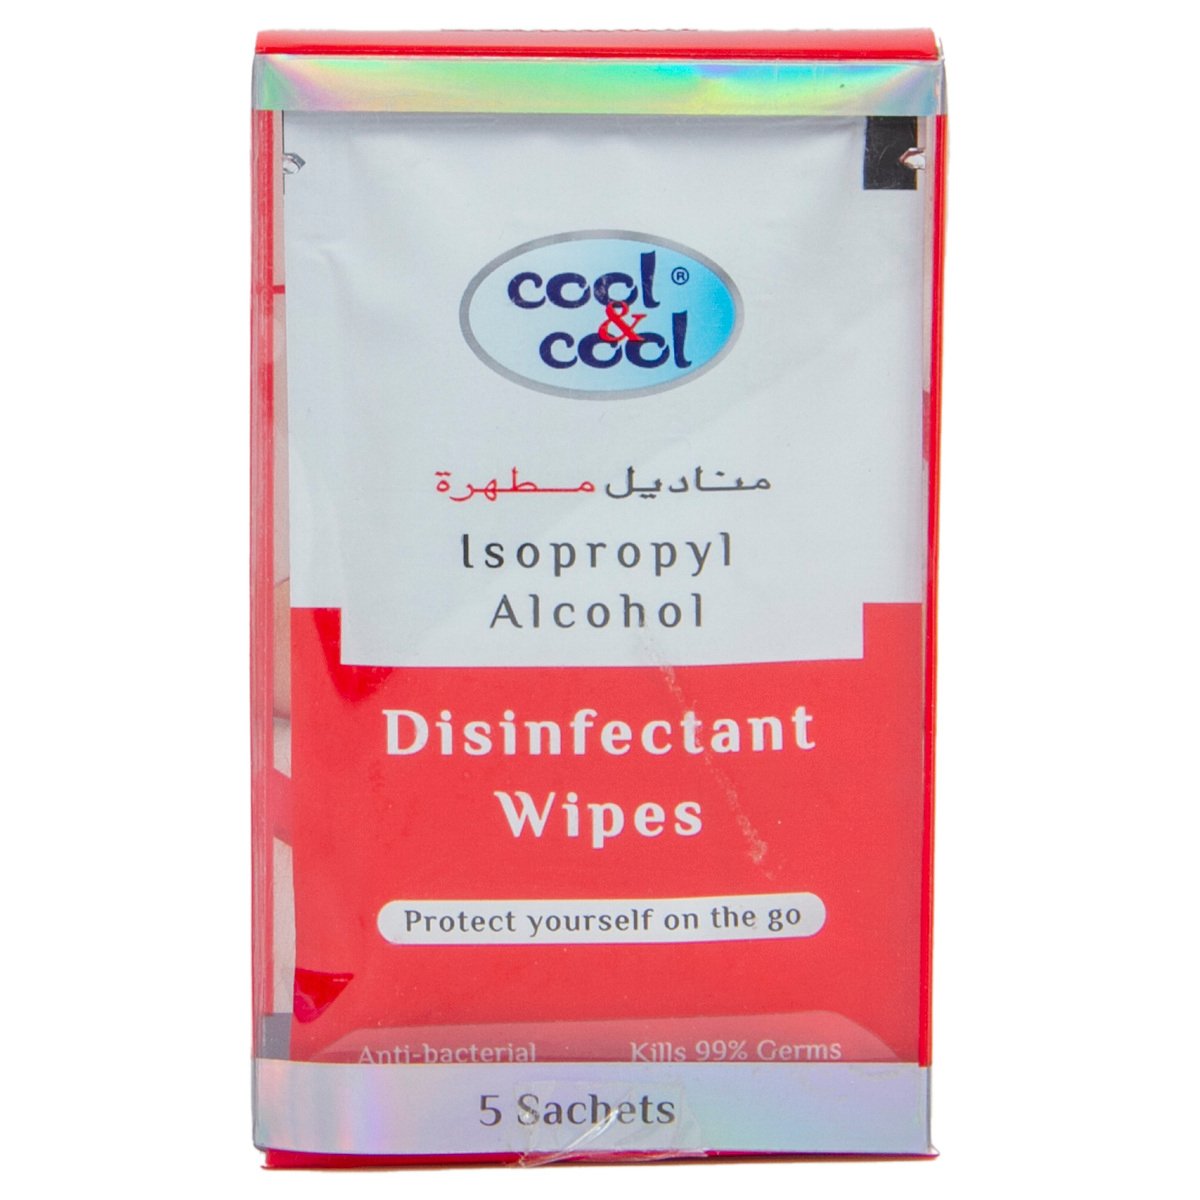 Cool & Cool Antibacterial Disinfectant Wipes 5pcs